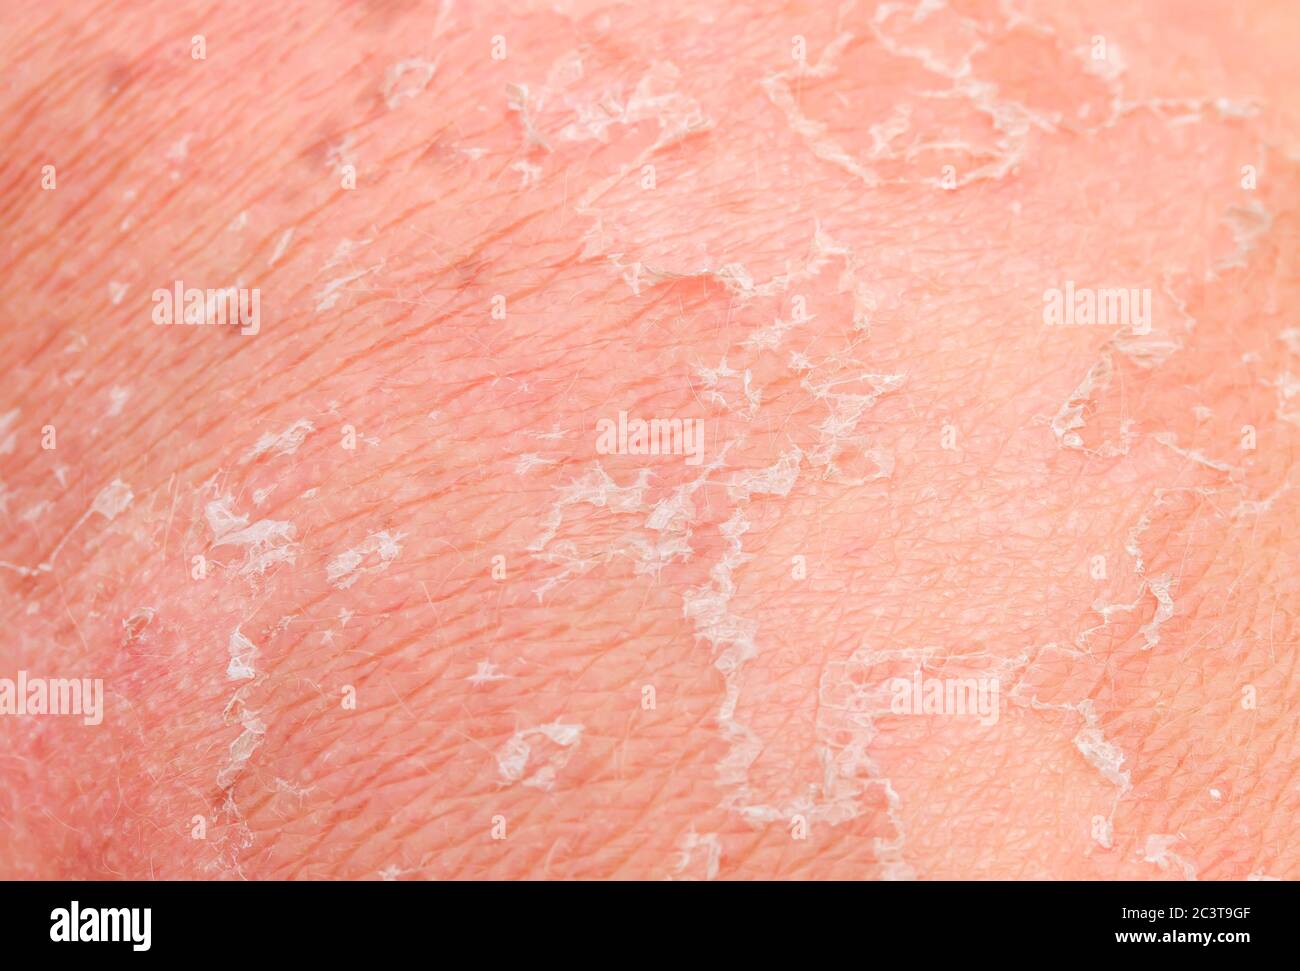 textured background with scales of dead skin cells with redness and pigmentation after sunburn are detached from the body Stock Photo